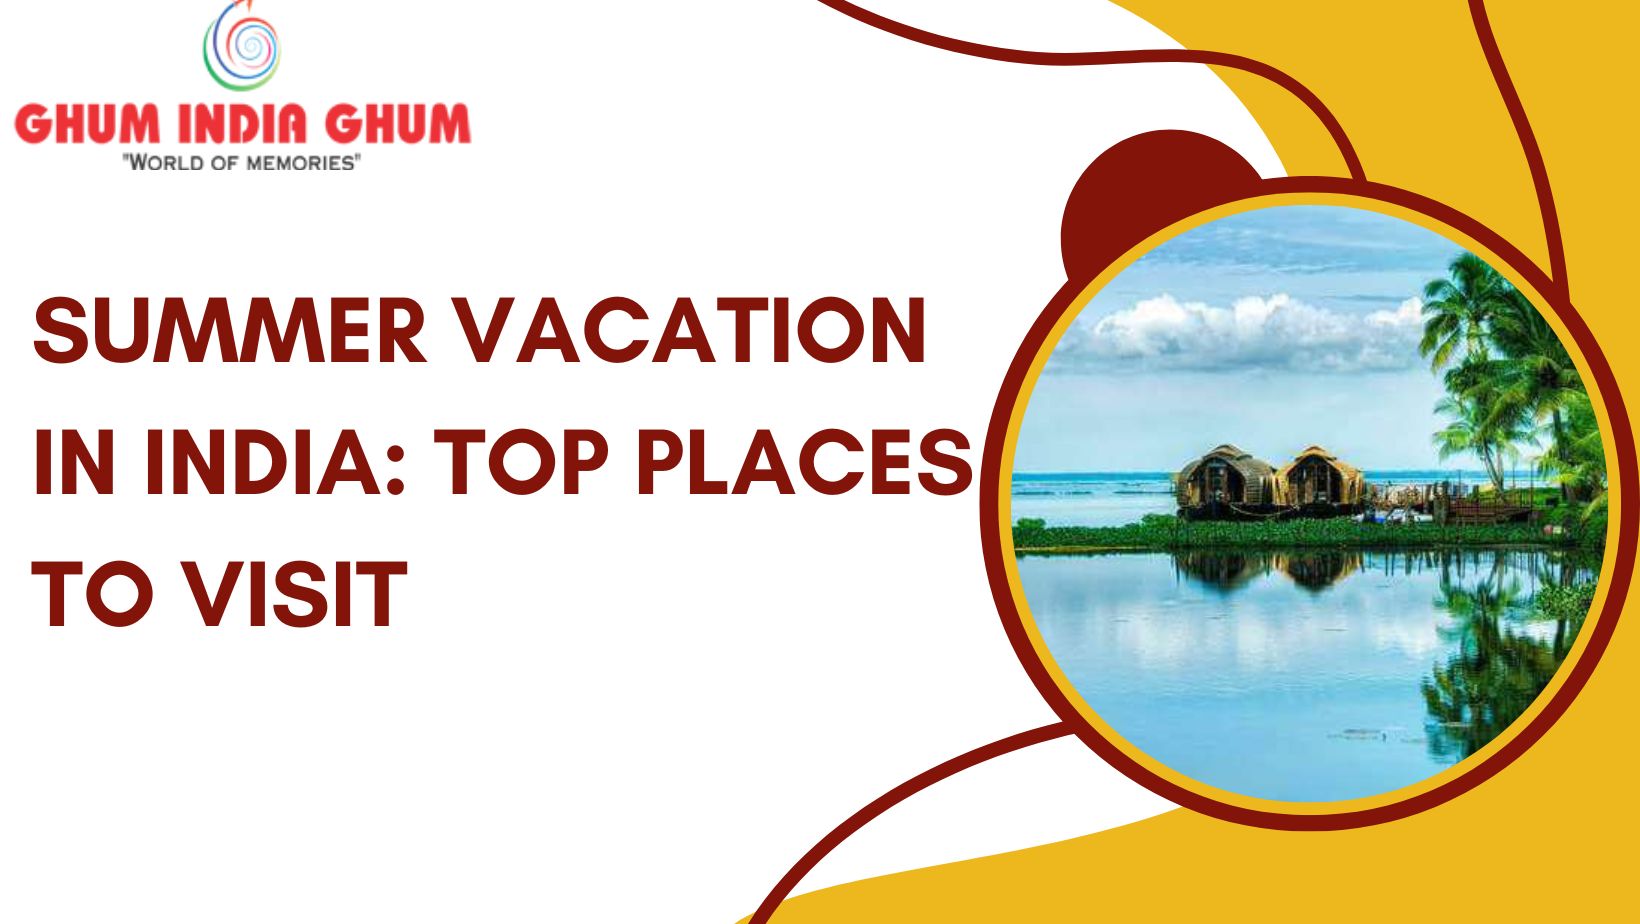 Summer Vacation in India: Top Places to Visit